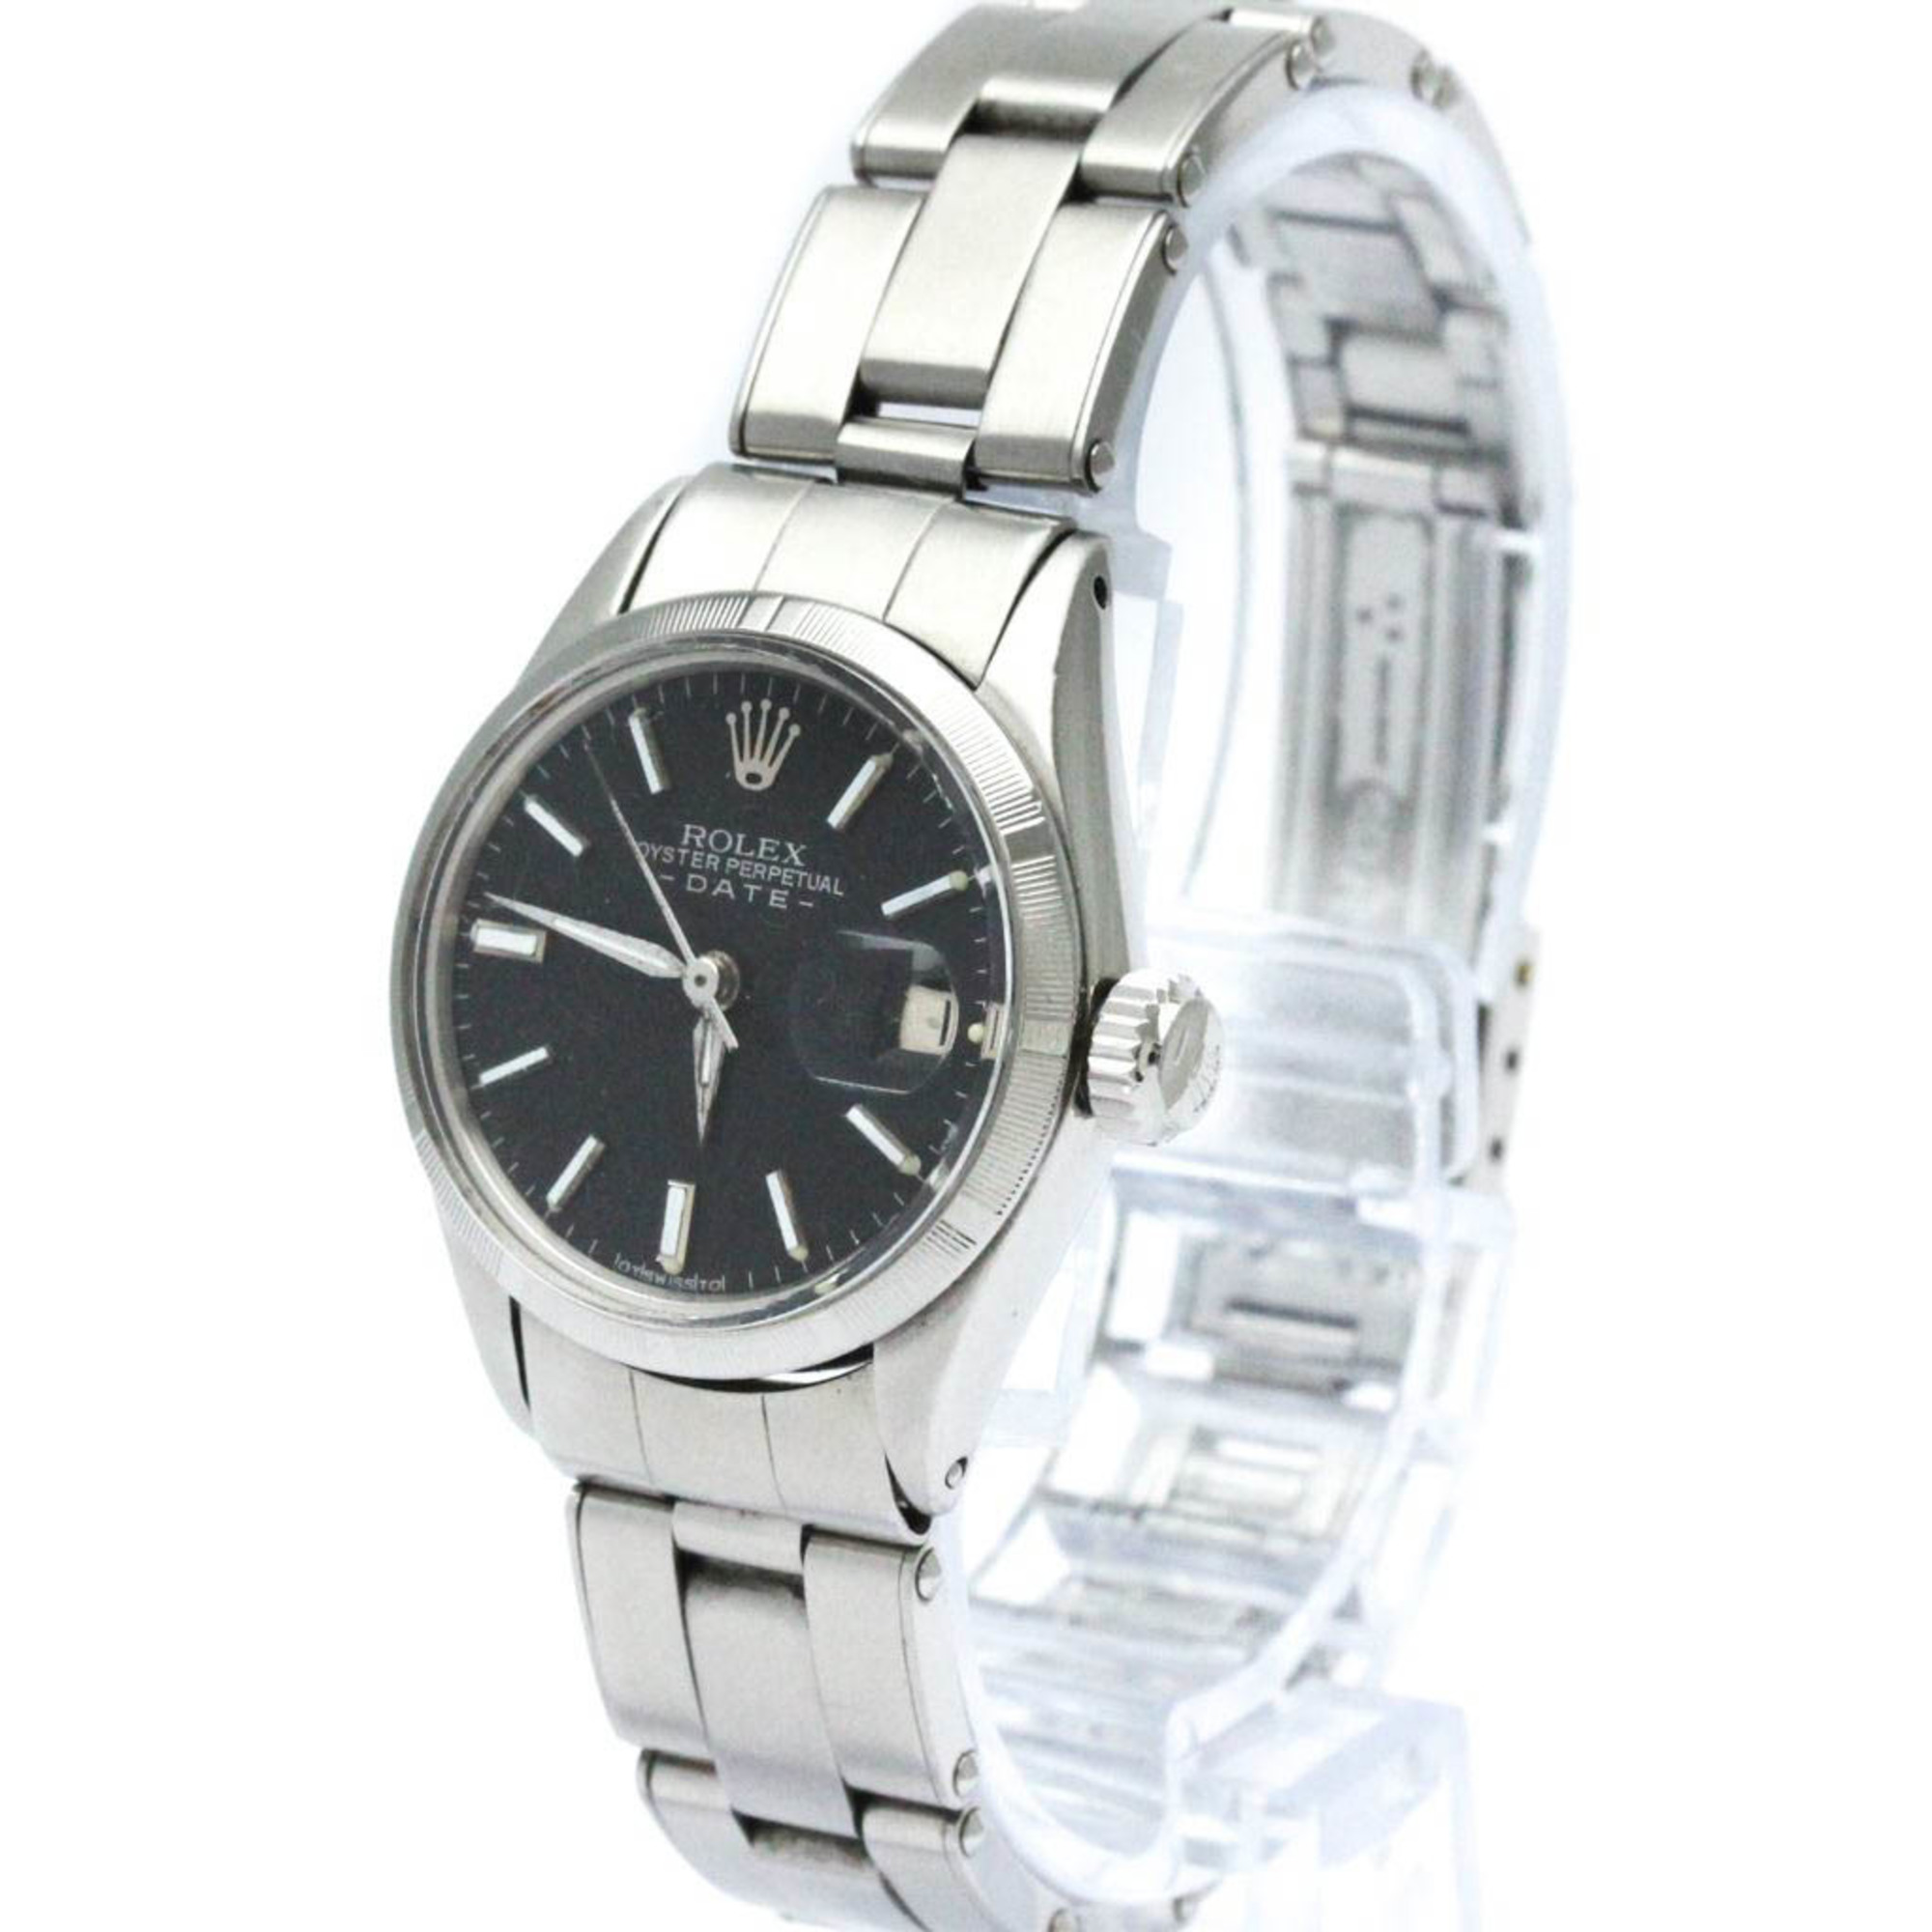 Vintage ROLEX Oyster Perpetual Date 6519 Steel Automatic Ladies Watch BF566827